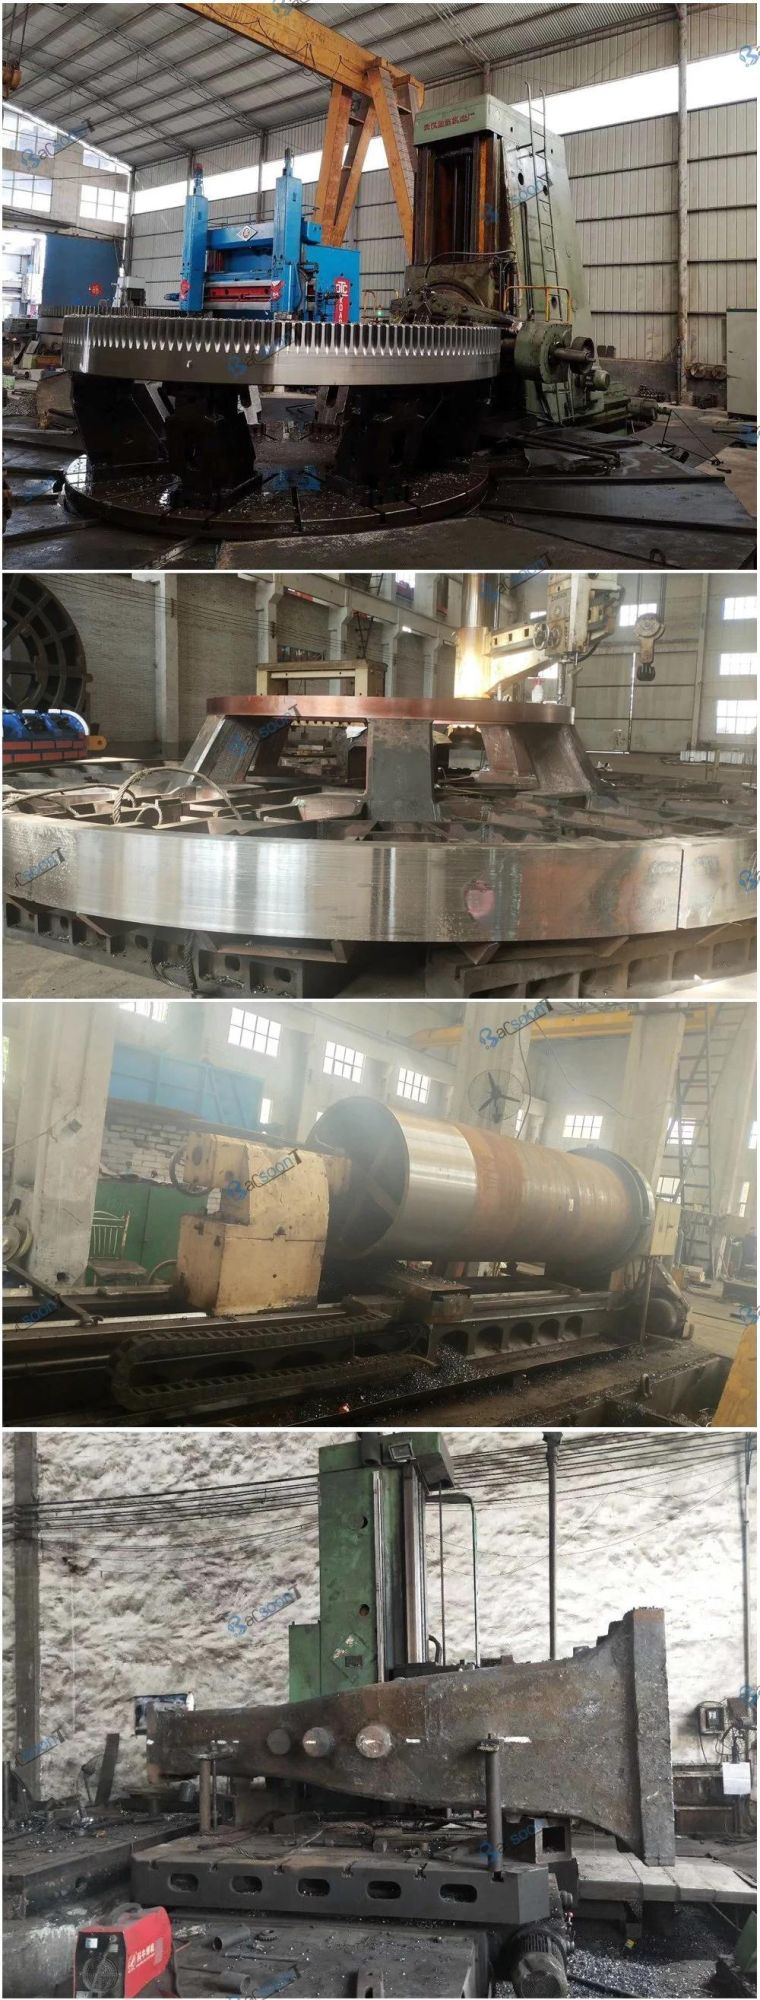 Cast Steel Large Belt Sheave with Precision Machining